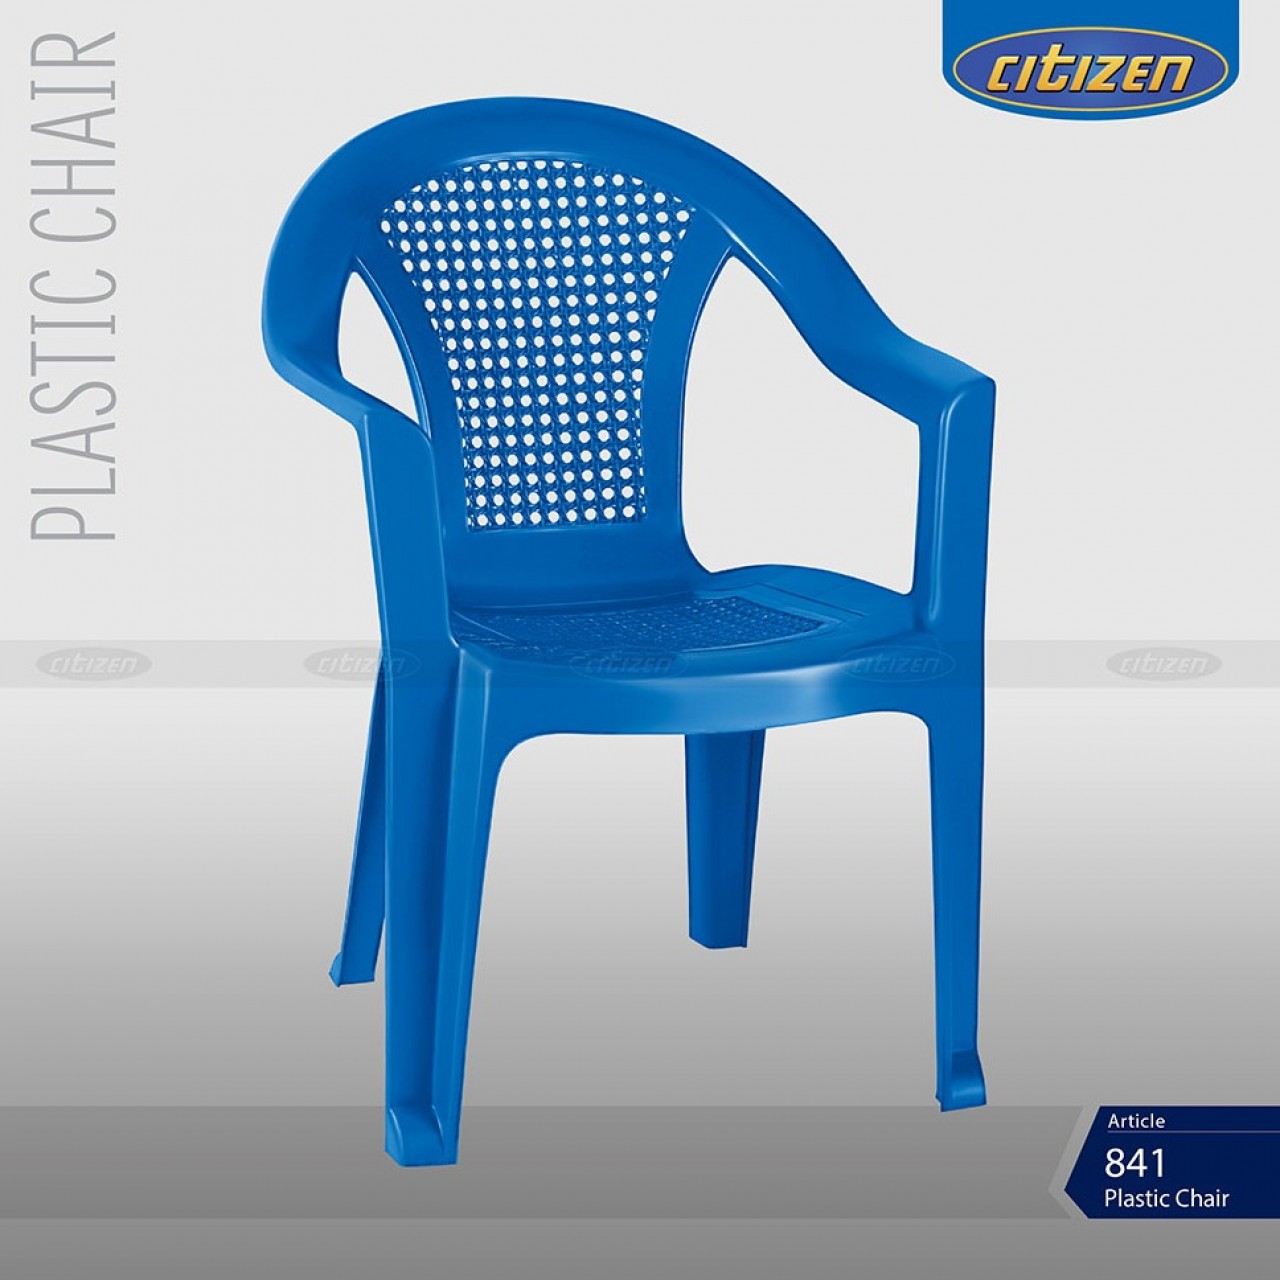 Citizen 842 Plastic Regular Chair With Arms